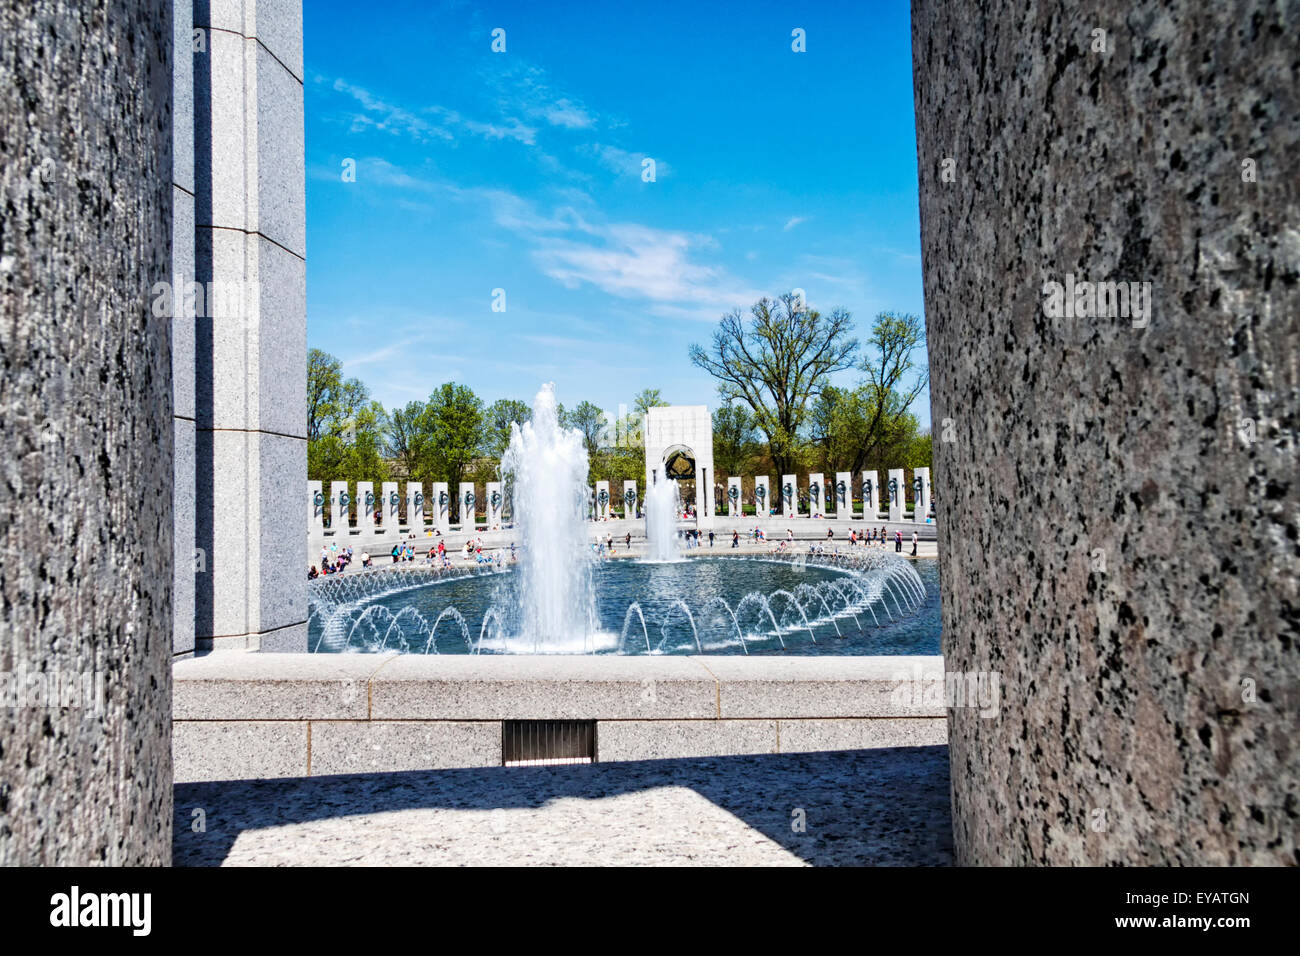 A view of The National World War II Memorial in Washington D.C., USA Stock Photo